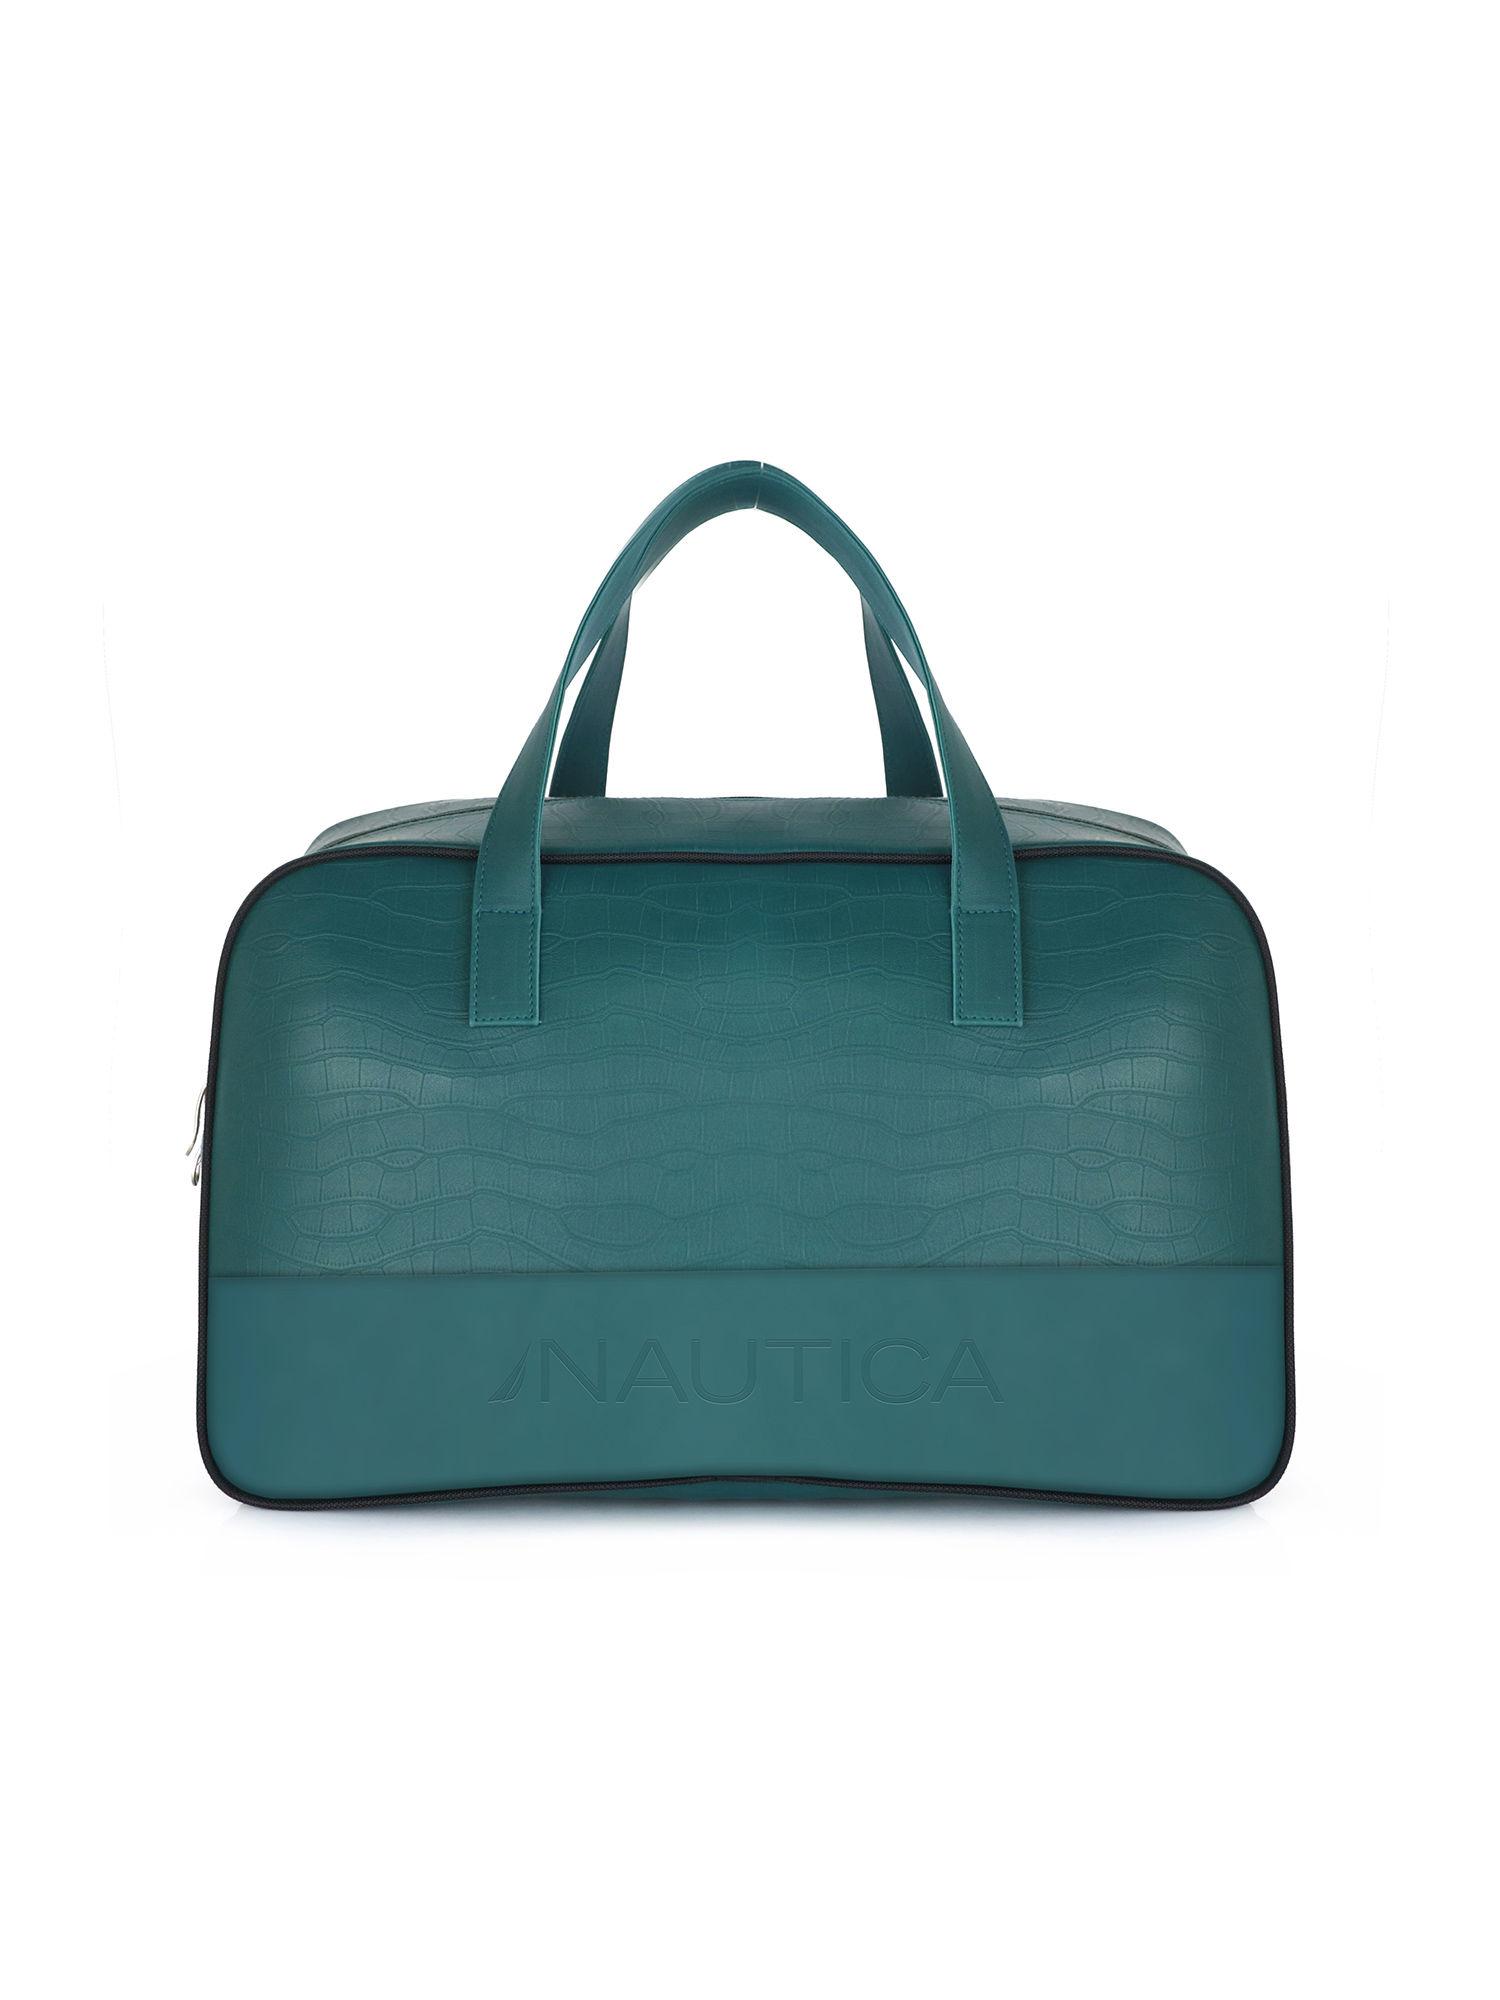 Stylish Duffle Bag Compact and Comfortable for Travelling Suitable for Men and Women